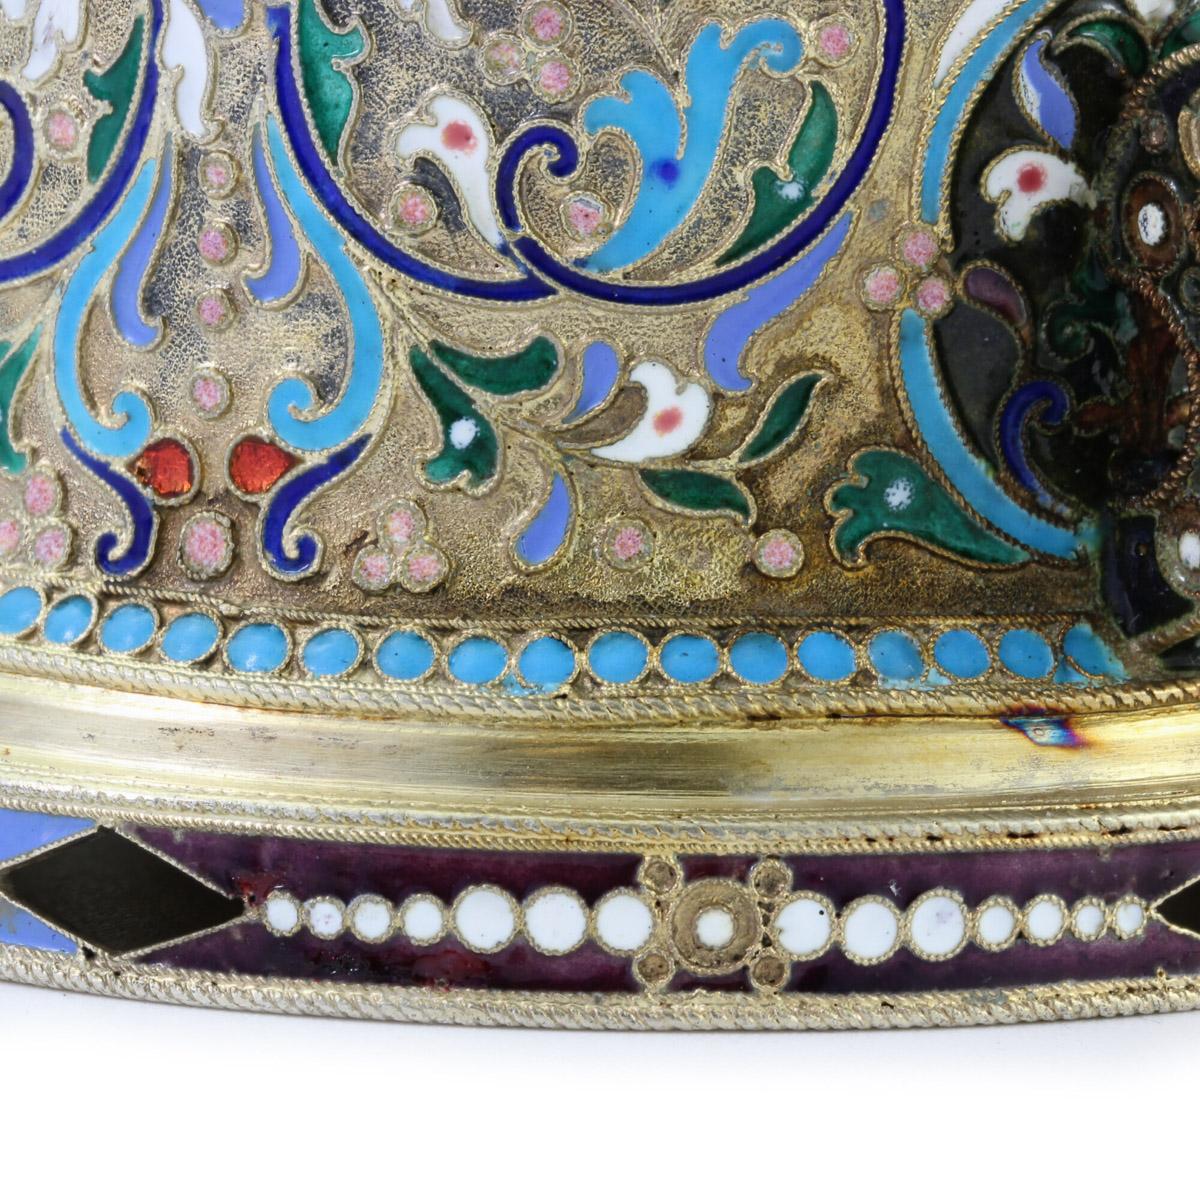 20th Century Imperial Russian Solid Silver-Gilt Enamel Tea Glass Holder, c.1900 5